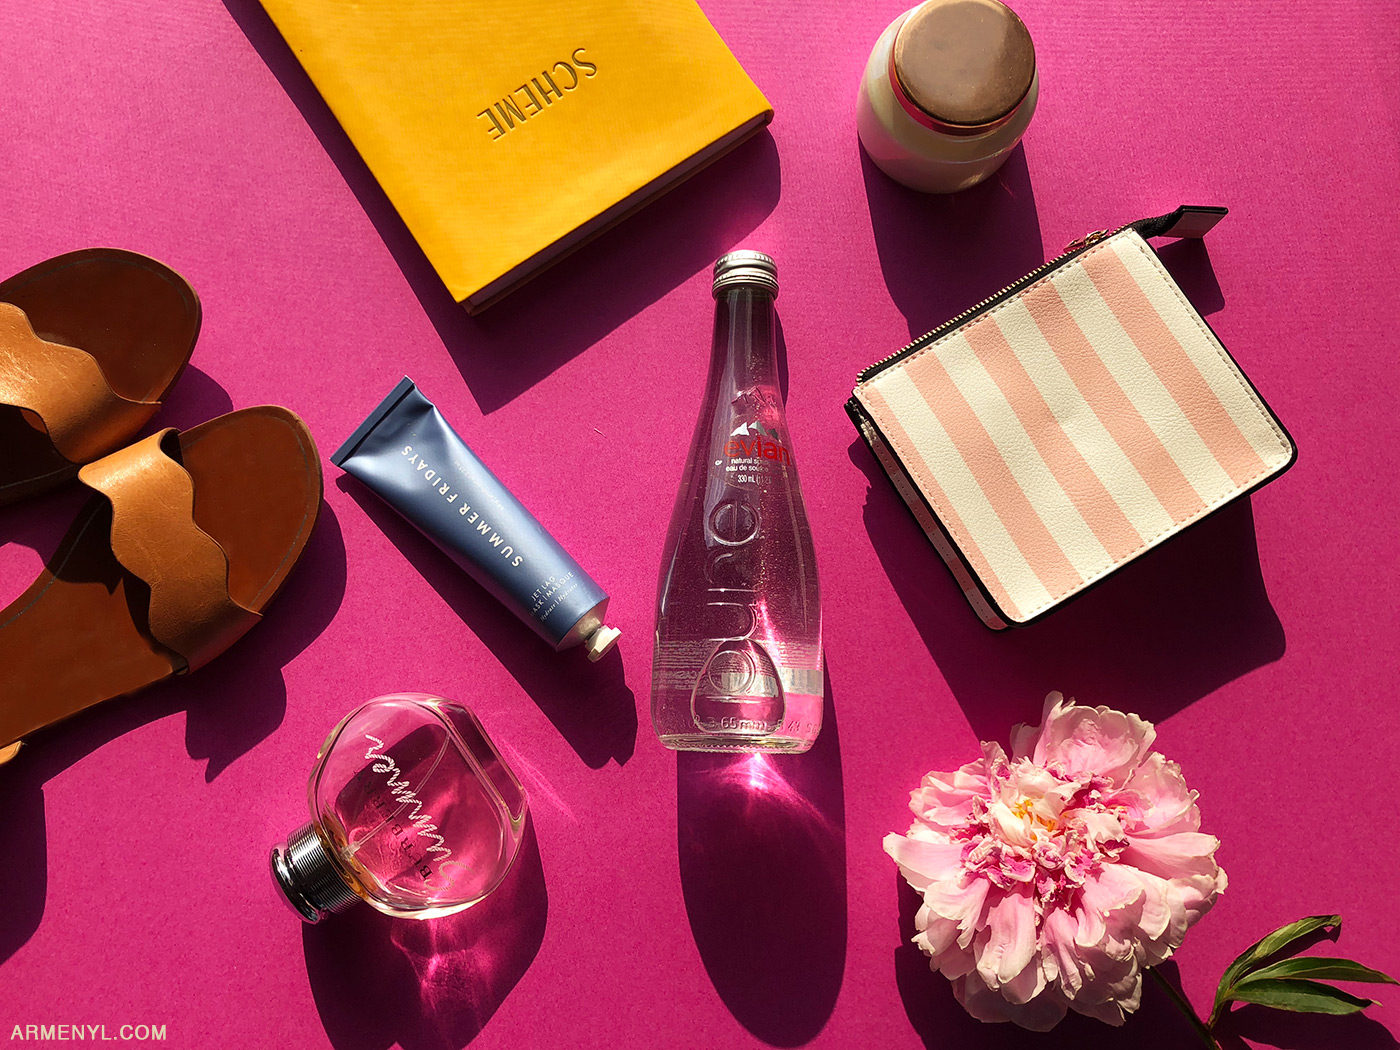 Summer Essentials -featuring summer fridays mask, Zara and more product styling and photography by Armenyl